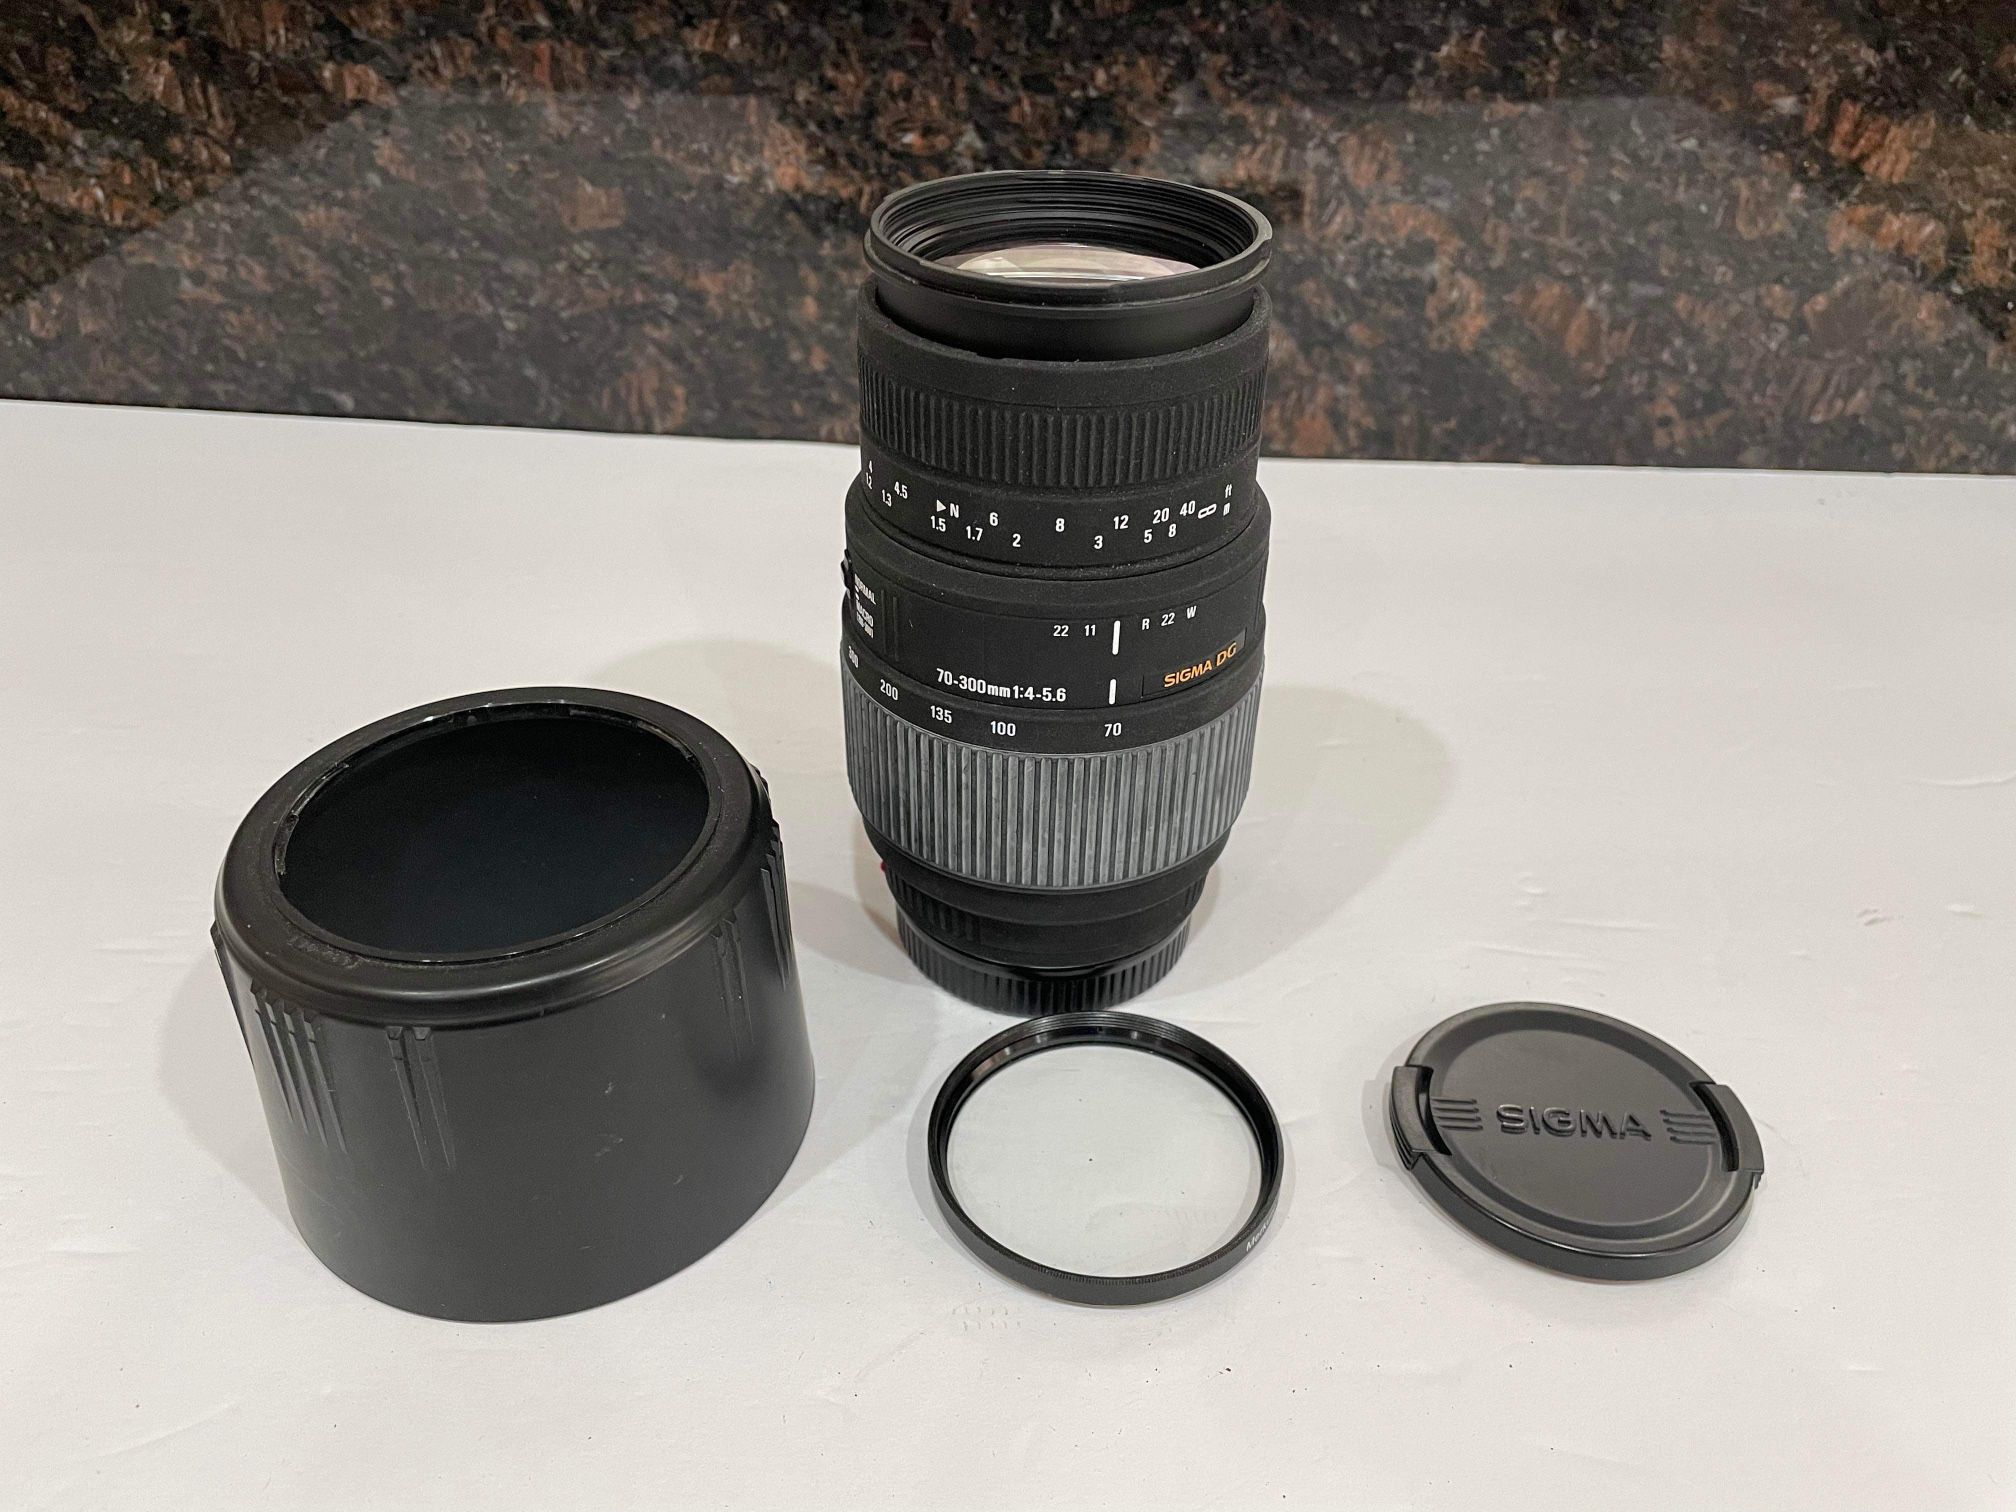 Sigma 70-300mm f/4-5.6 DG Macro Telephoto Zoom Lens for Sony SLR Cameras - excellent used condition. No scratches or fungus Coral Springs 33071